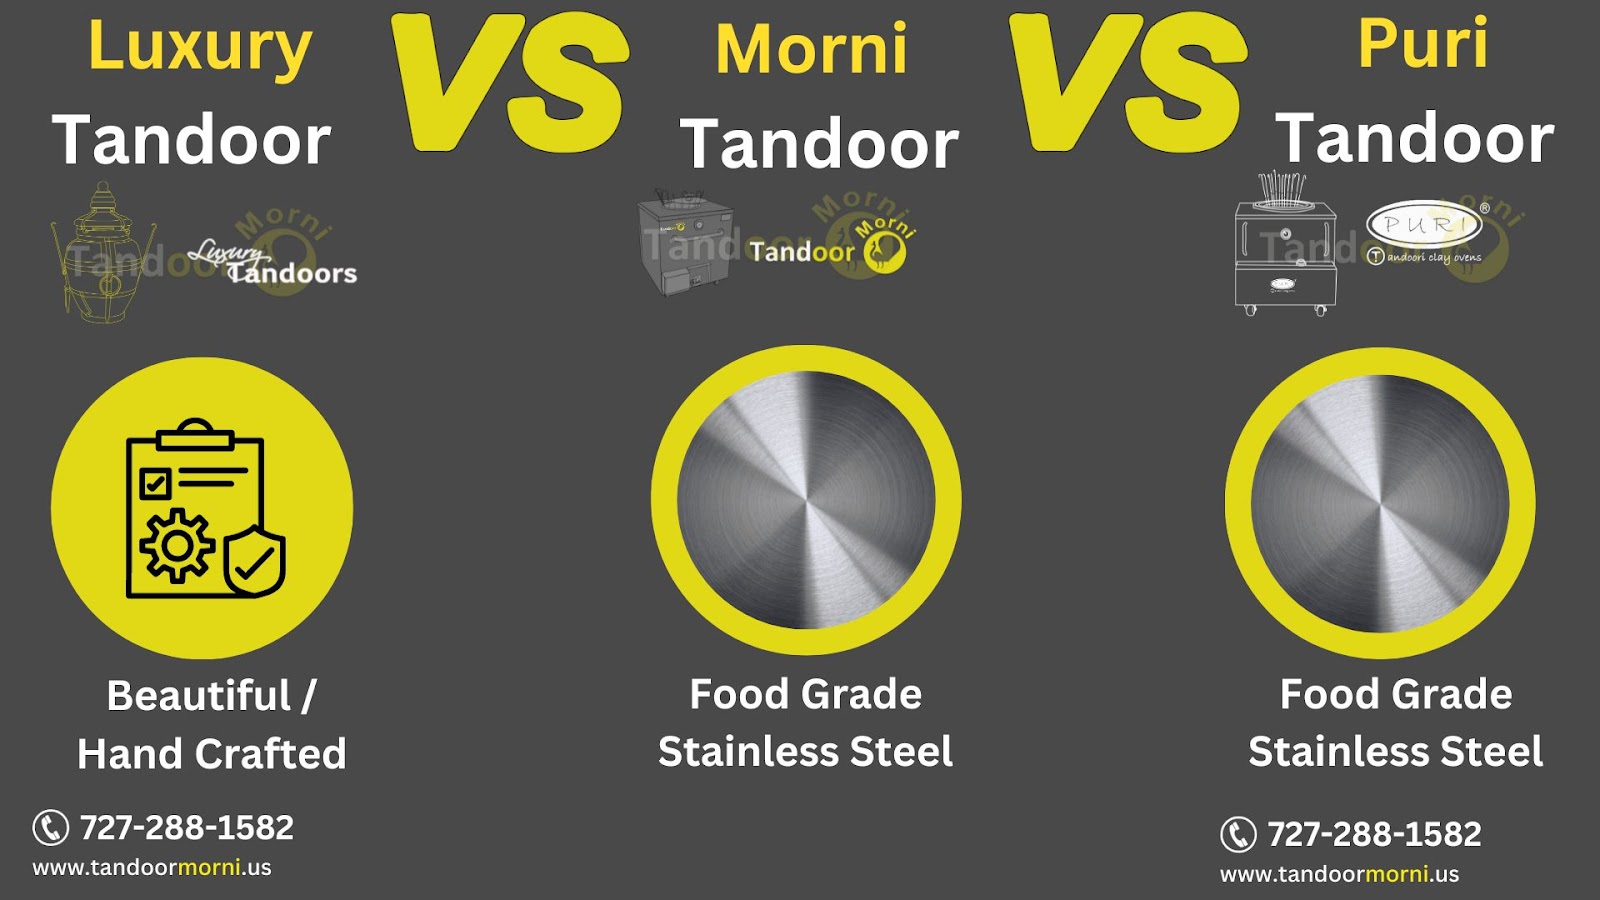 Construction, Craftsmanship, and Building Material Tandoor Morni versus Luxury Tandoor vs Puri Tandoor

Luxury is handcrafted, and Morni Tandoor and Puri Tandoor are made of food quality steel, as shown in the photograph.